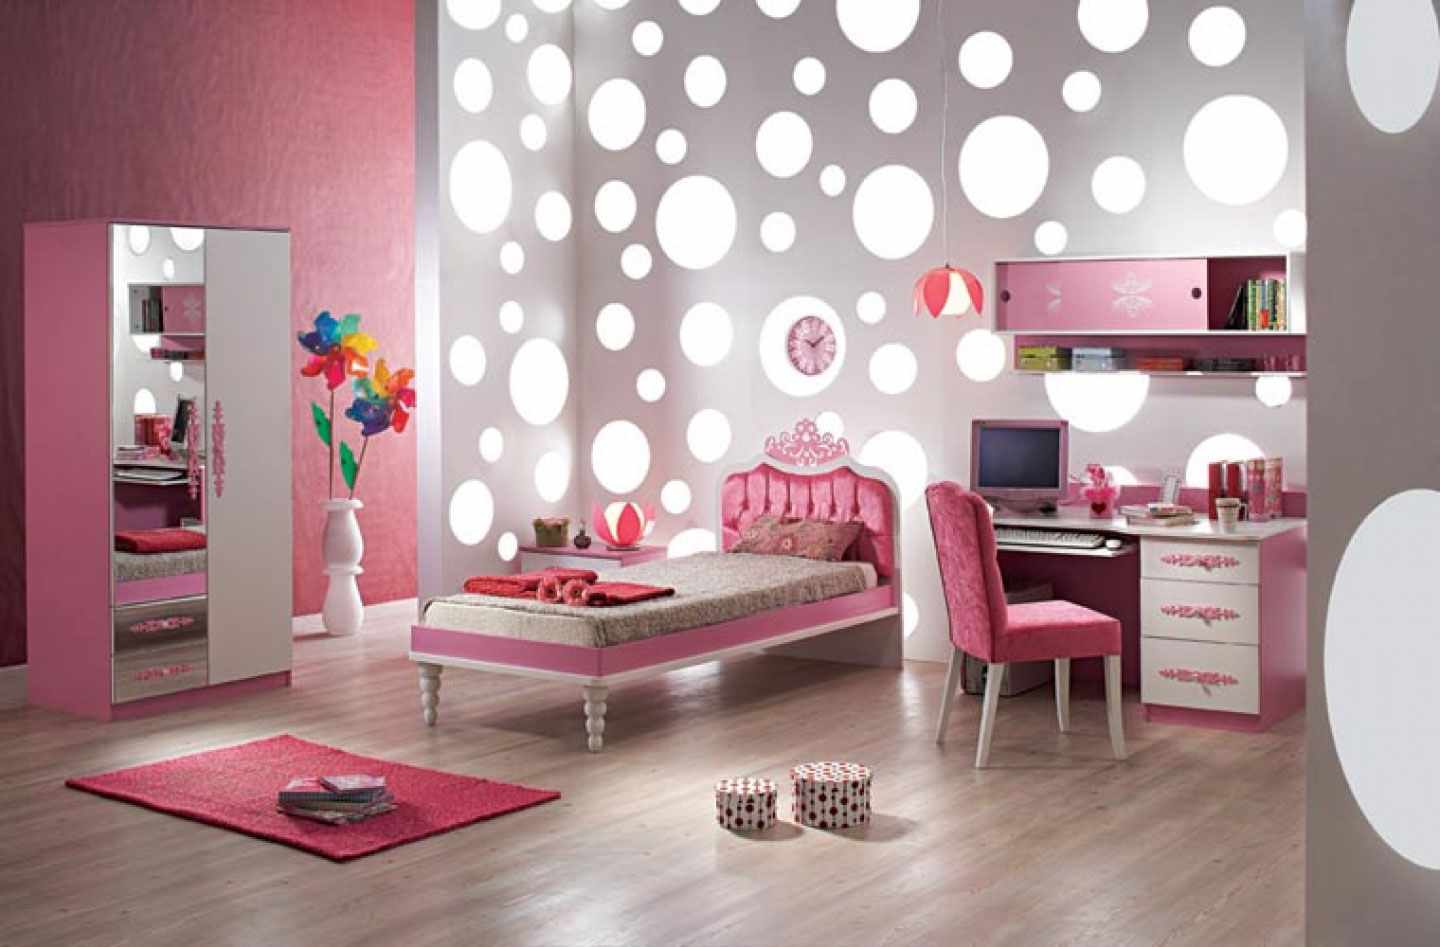 option for a bright bedroom interior for a girl